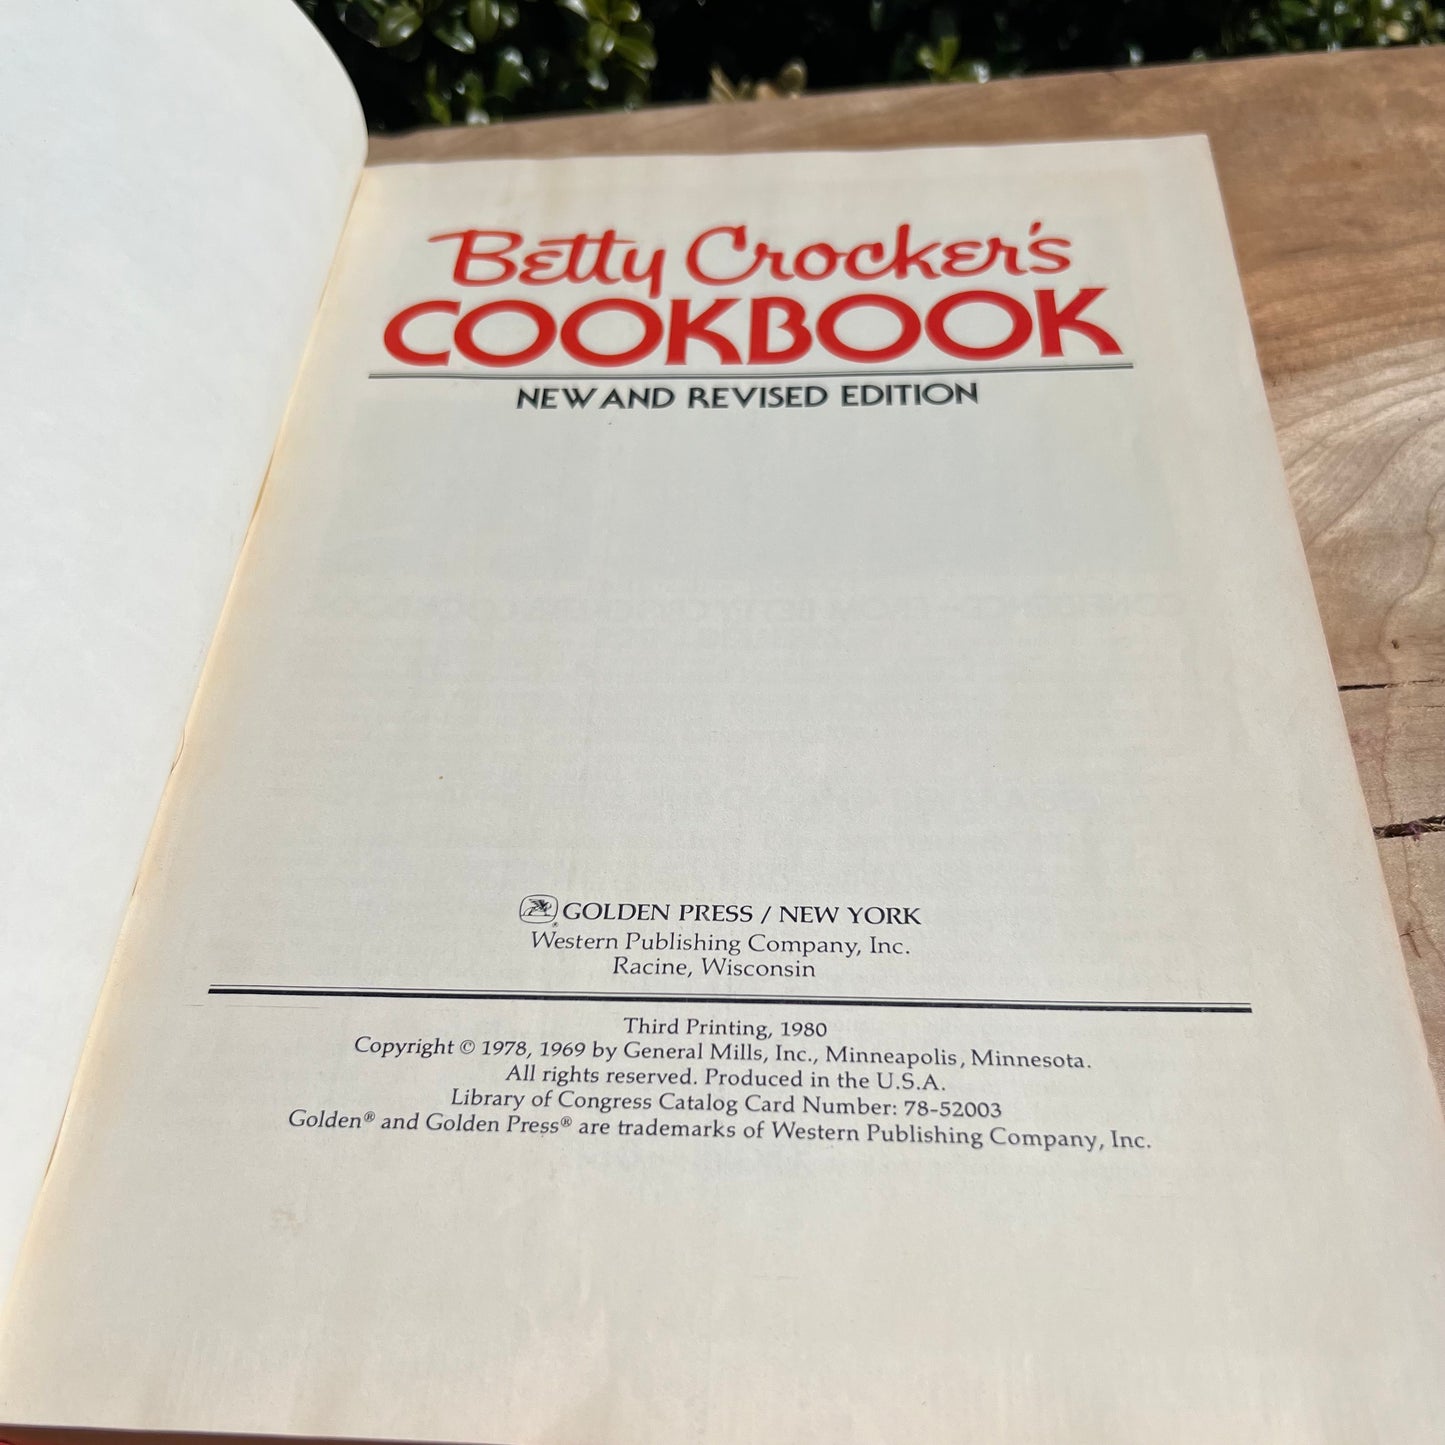 Two Betty Crocker's Cook Books One New Good & Easy 1962 Spiral & Vintage Apron